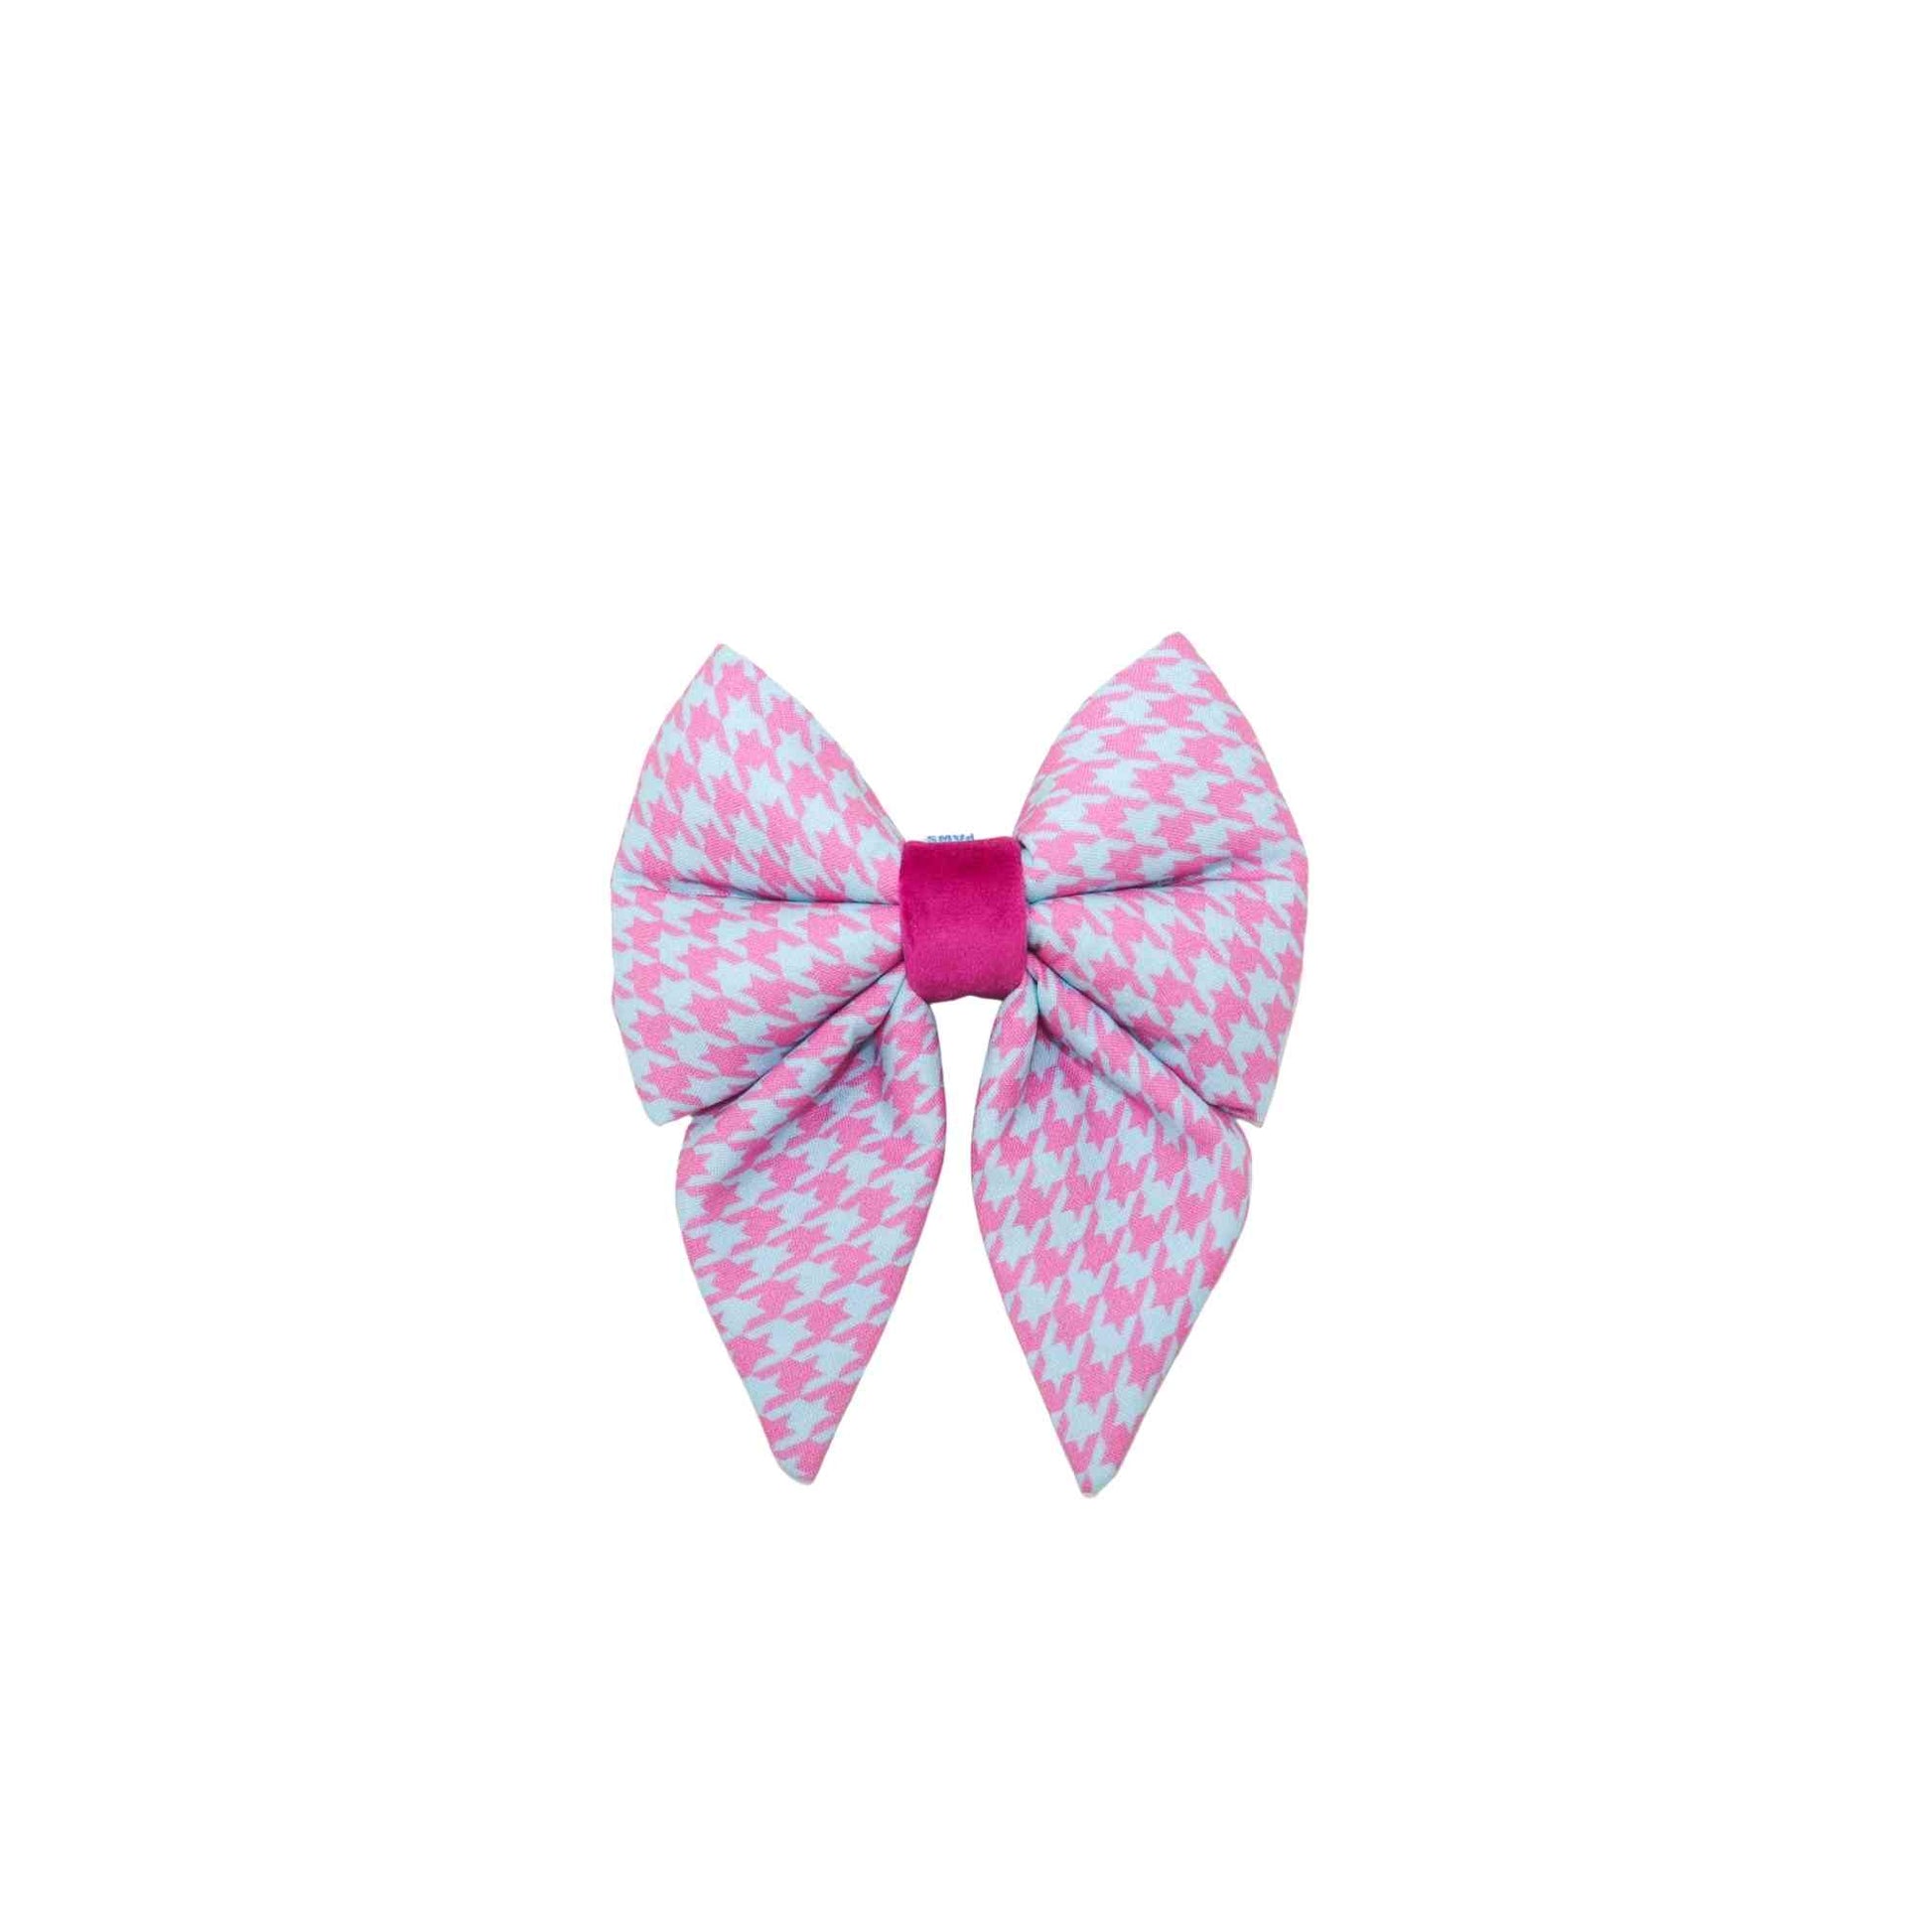 Make your pup the most stylish one in the park with our Pink and Blue Houndstooth Girl Dog Sailor Bow! This handmade bow is designed to slip easily over your pup's collar and comes in a range of sizes to fit dogs of all breeds and sizes. Made with high-quality fabric and expert craftsmanship, this bow is both durable and comfortable. The pink and blue houndstooth print is perfect for the fashionable girl pup and adds a touch of sophistication to any outfit.